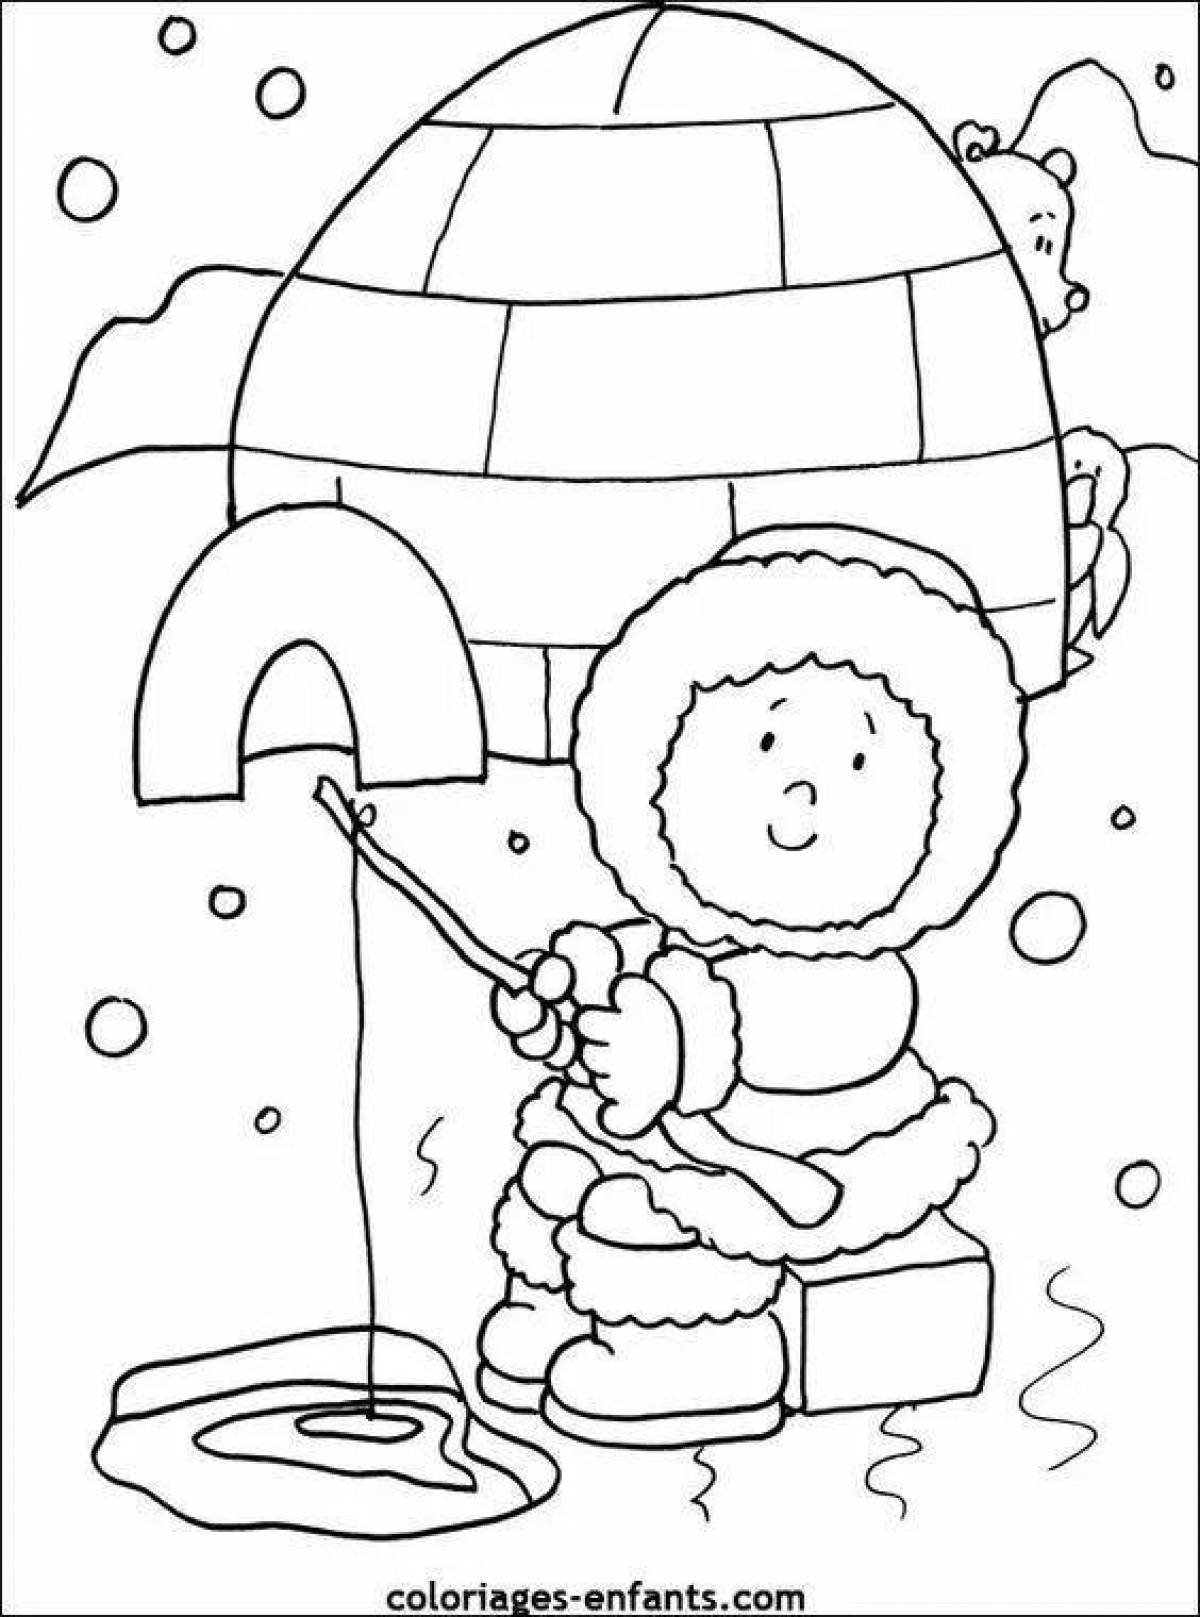 Glorious north pole coloring page